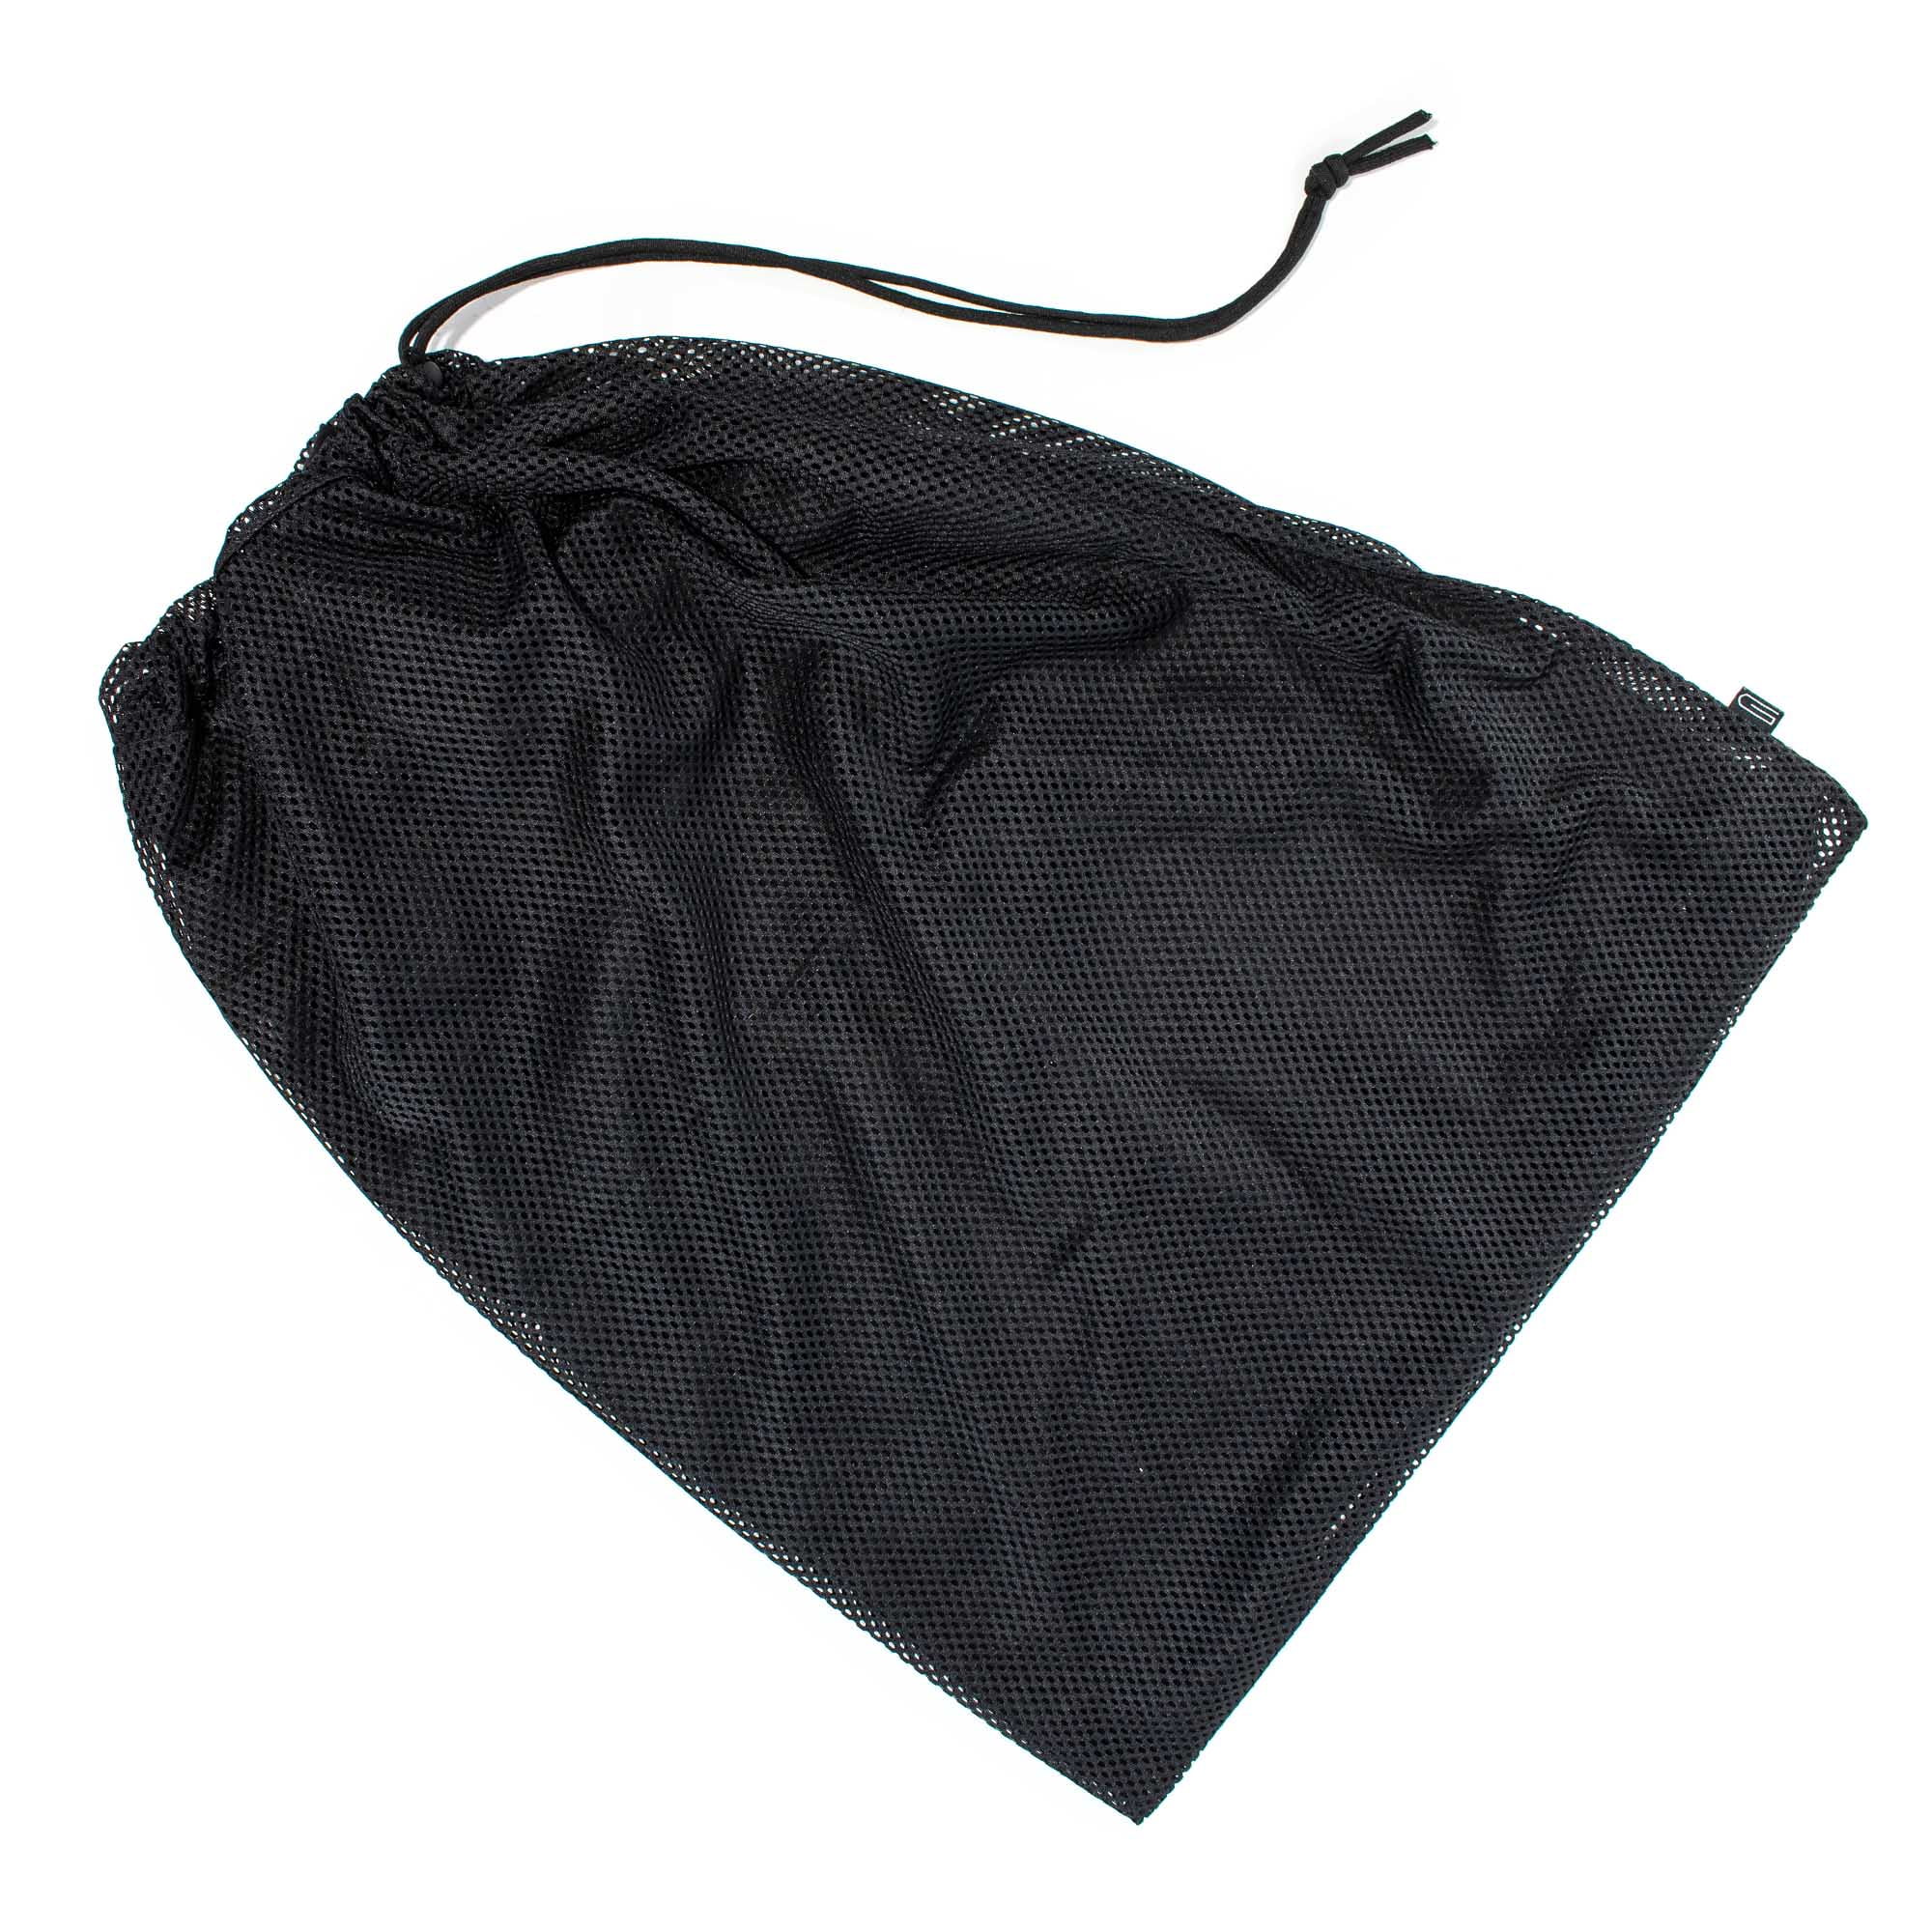 Camping Polyester Drawstring Bag Swimming Golberg Mesh Bag Small, Medium, and Large Use for Laundry Gym Clothes Ventilated Washable Reusable Stuff Sack